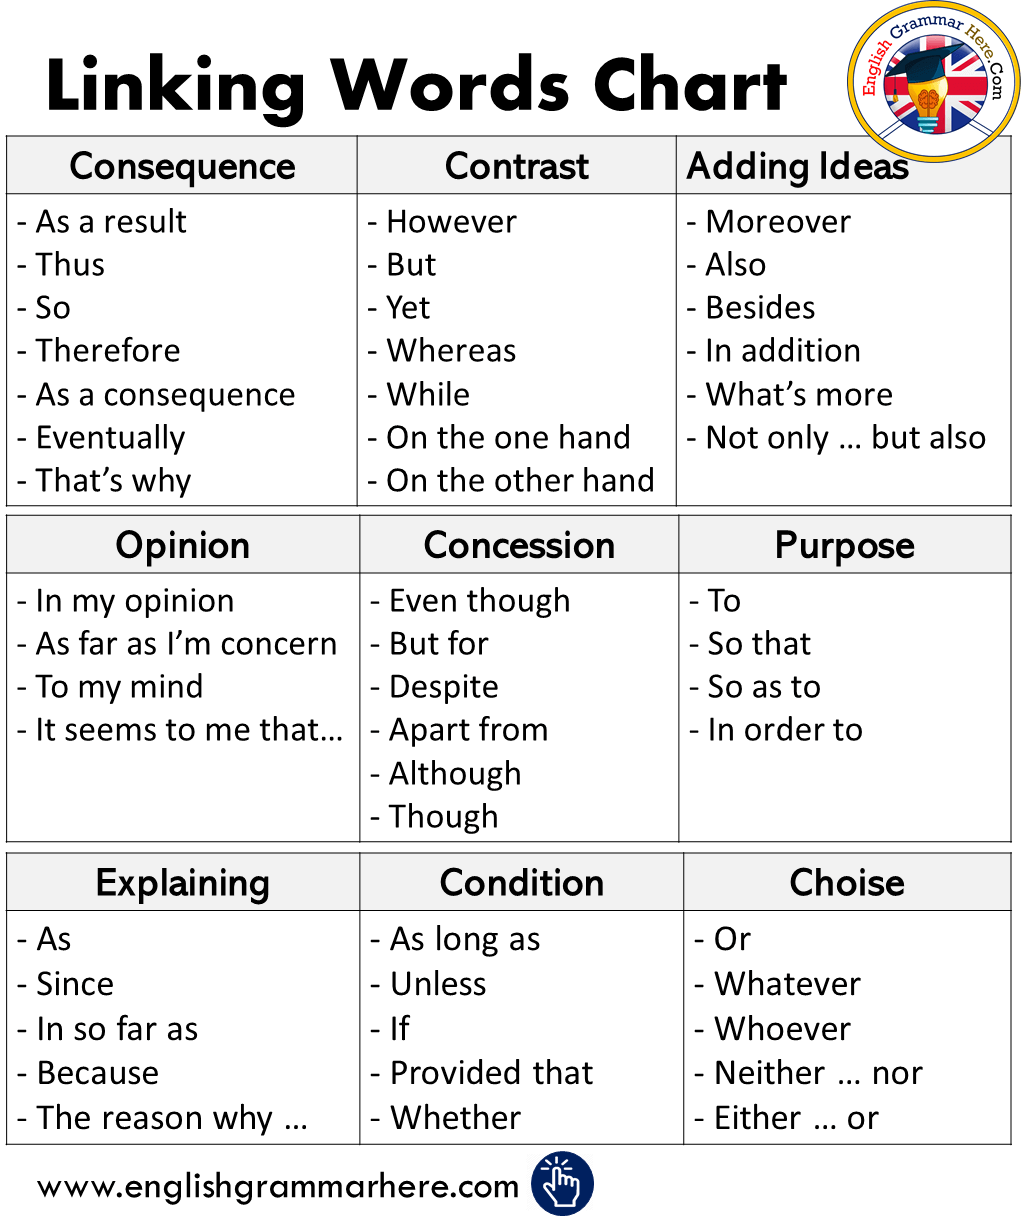 Linking Words Chart in English